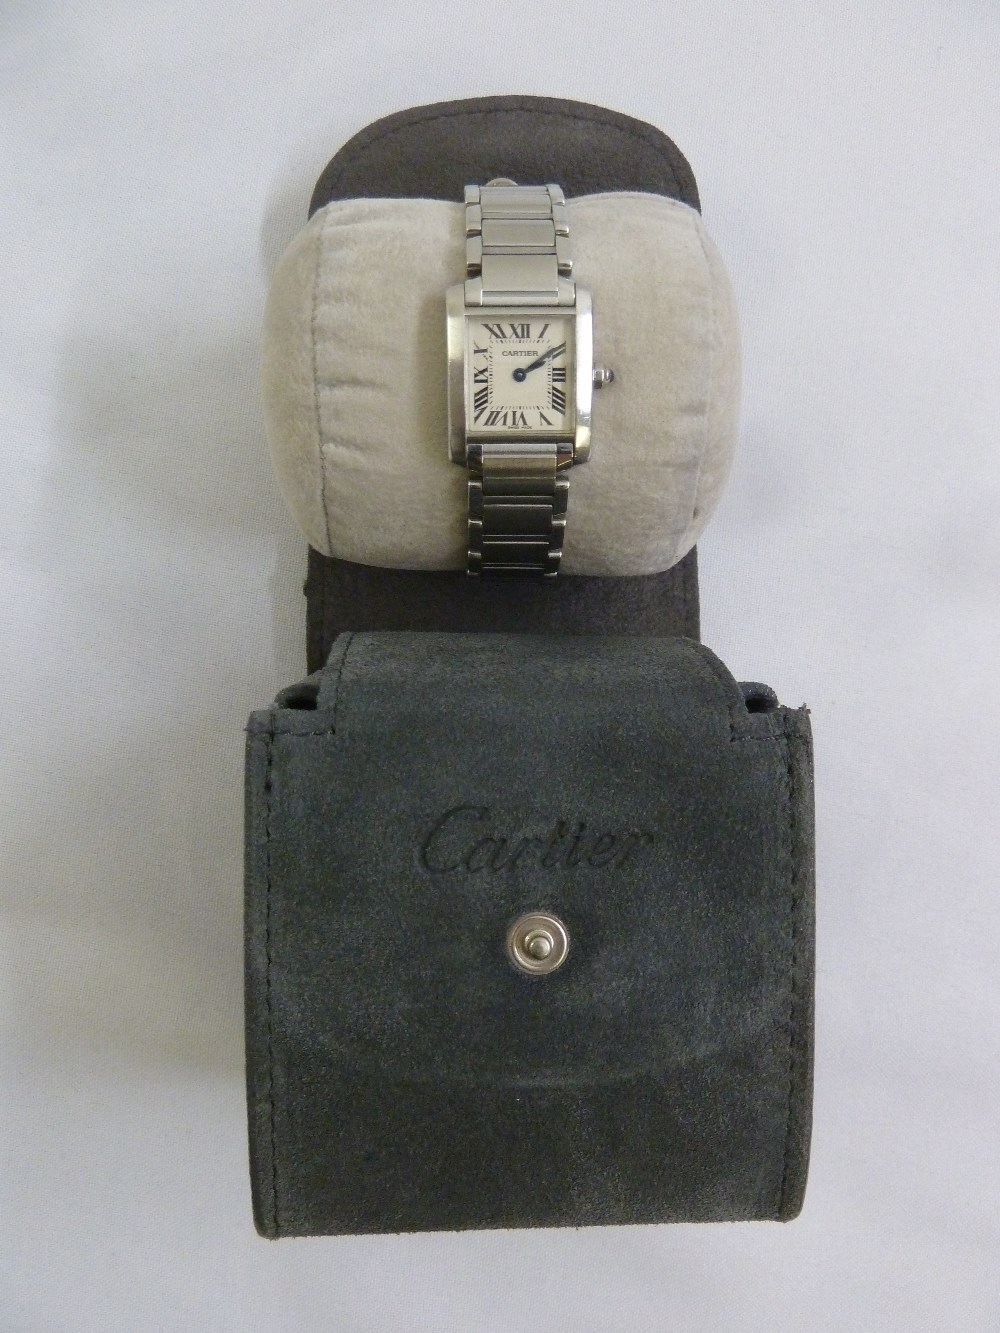 Cartier stainless steel ladies wristwatch, to include original packaging